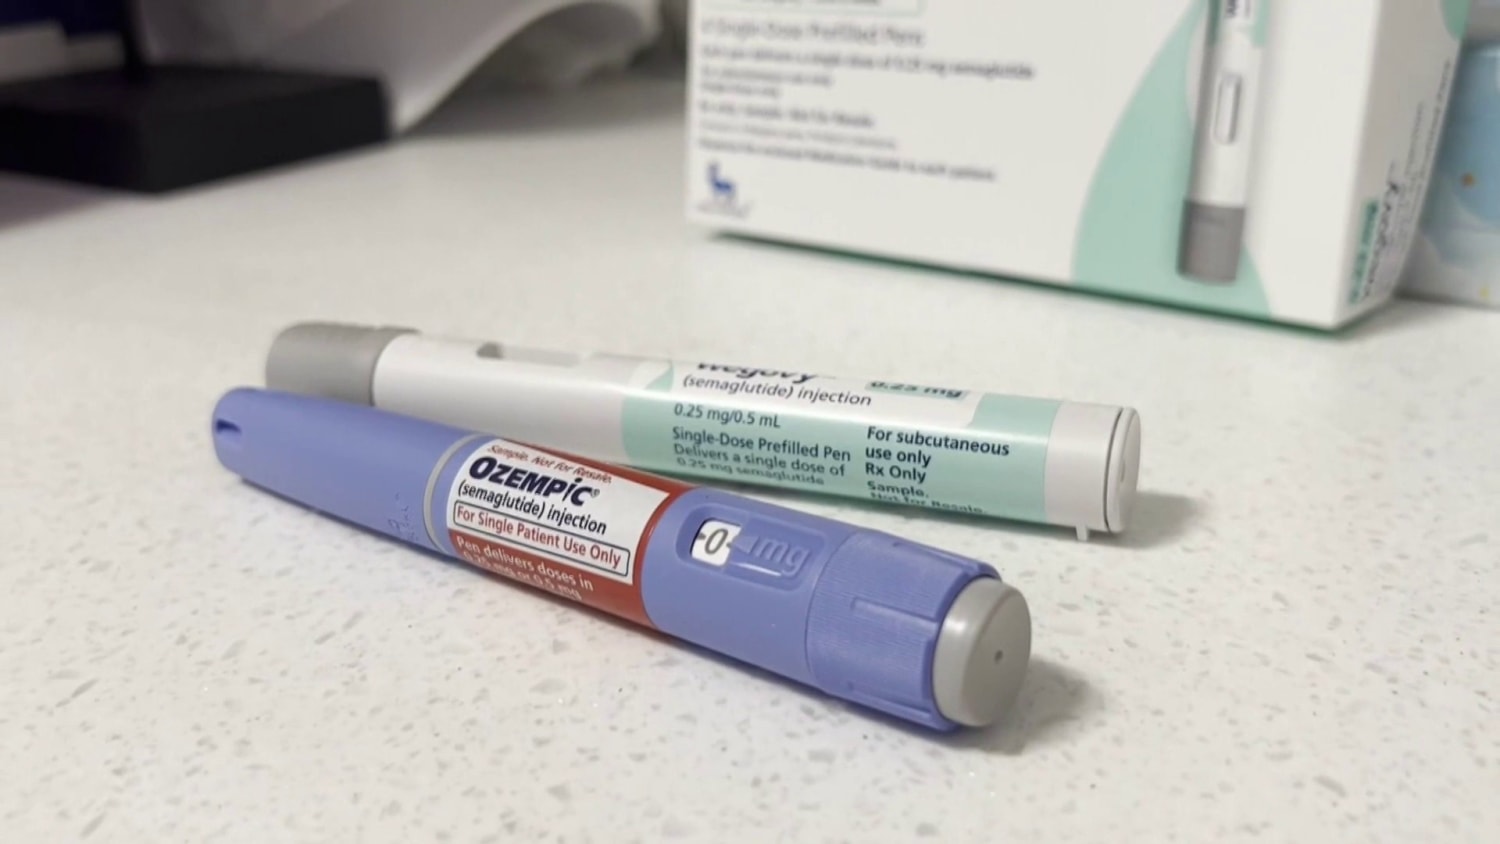  Patients harmed by fake Ozempic, Saxenda pens